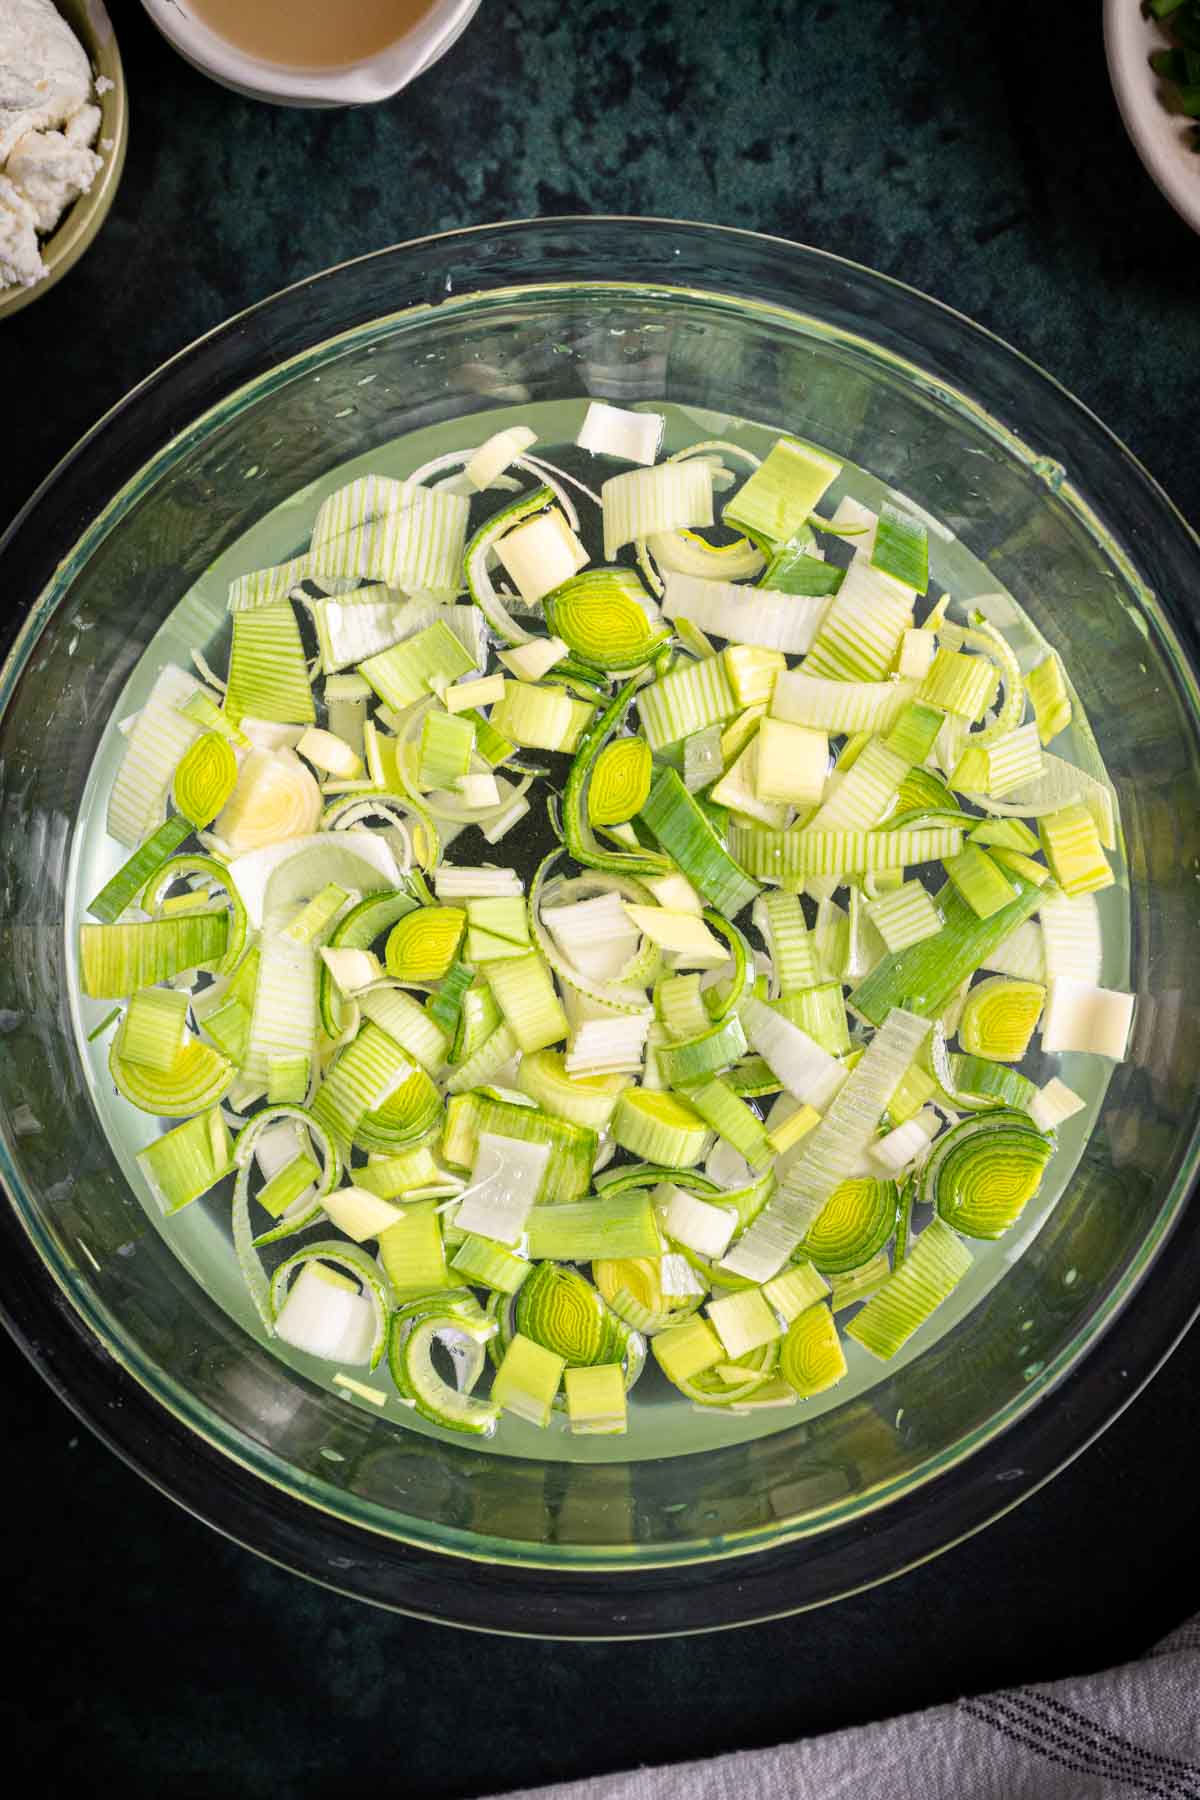 Sliced leeks in a bowl with water.